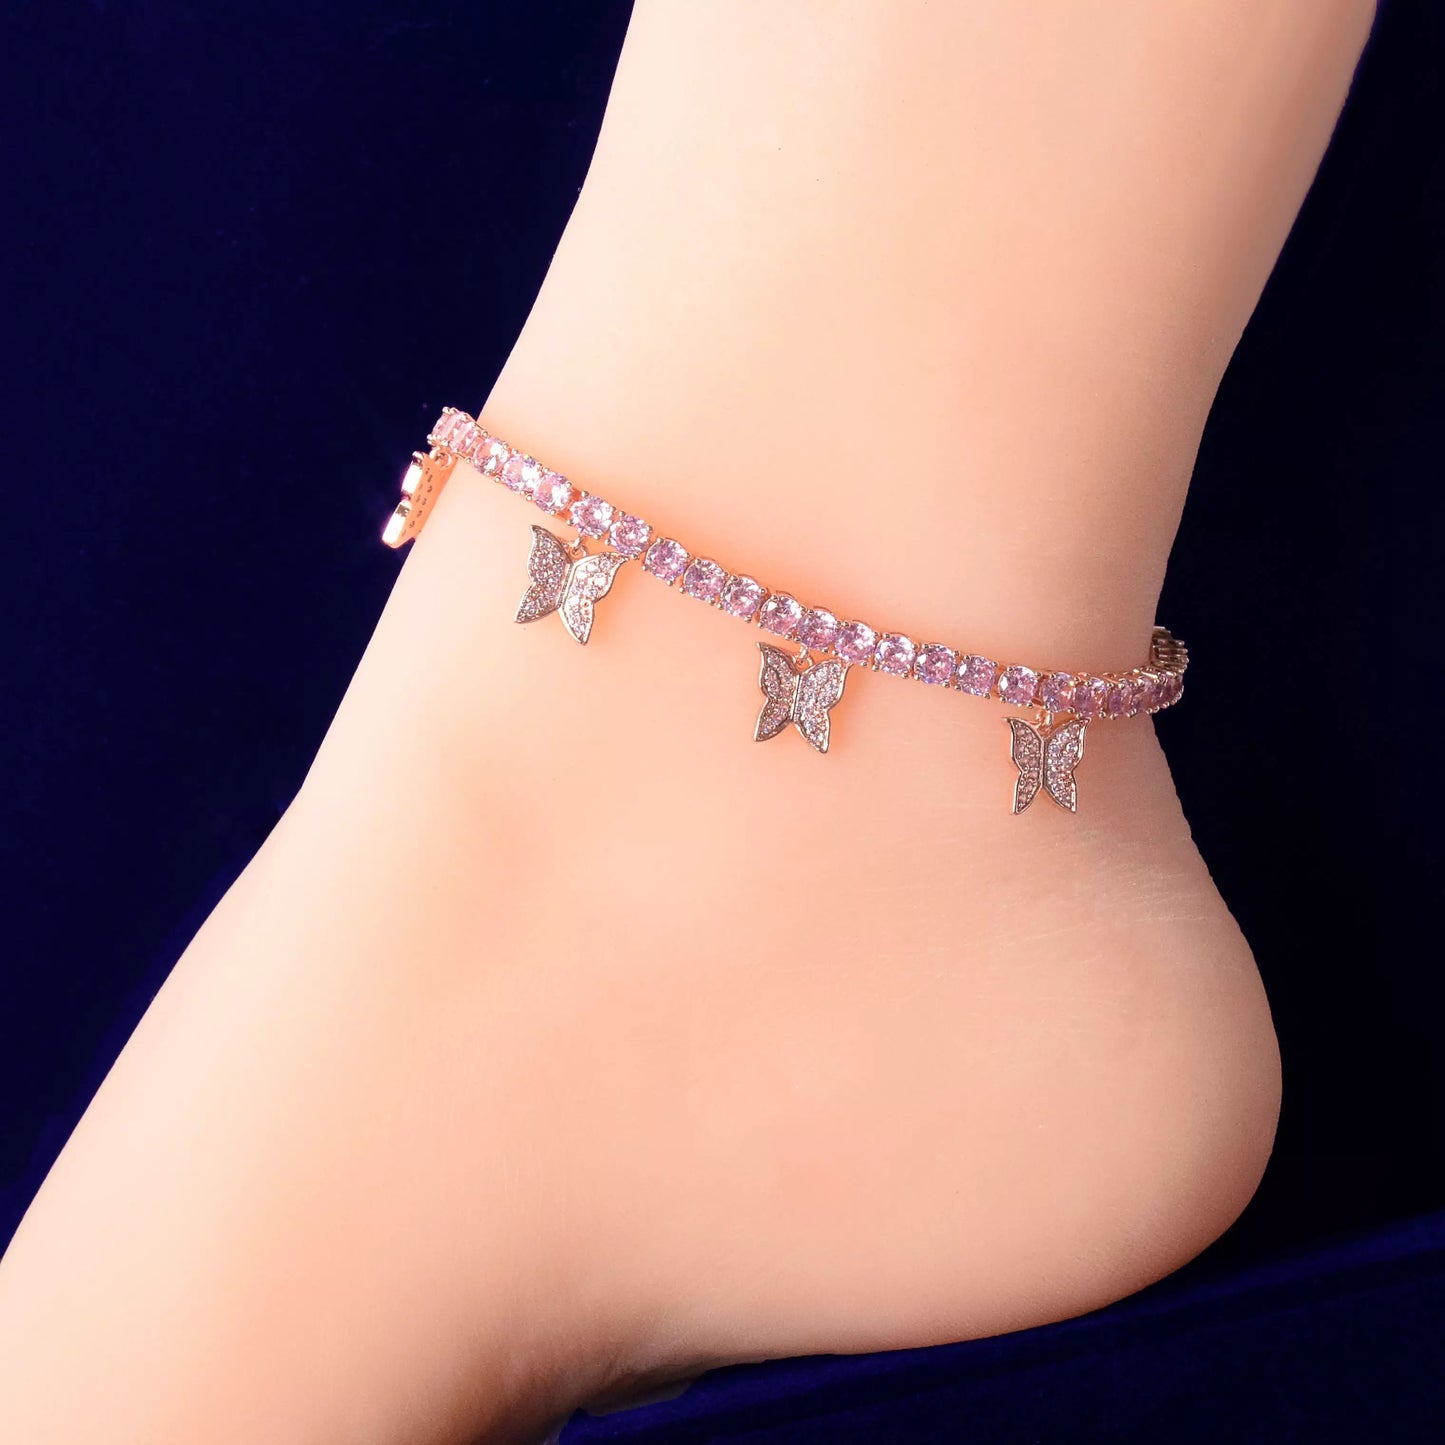 “Butterfly” anklet